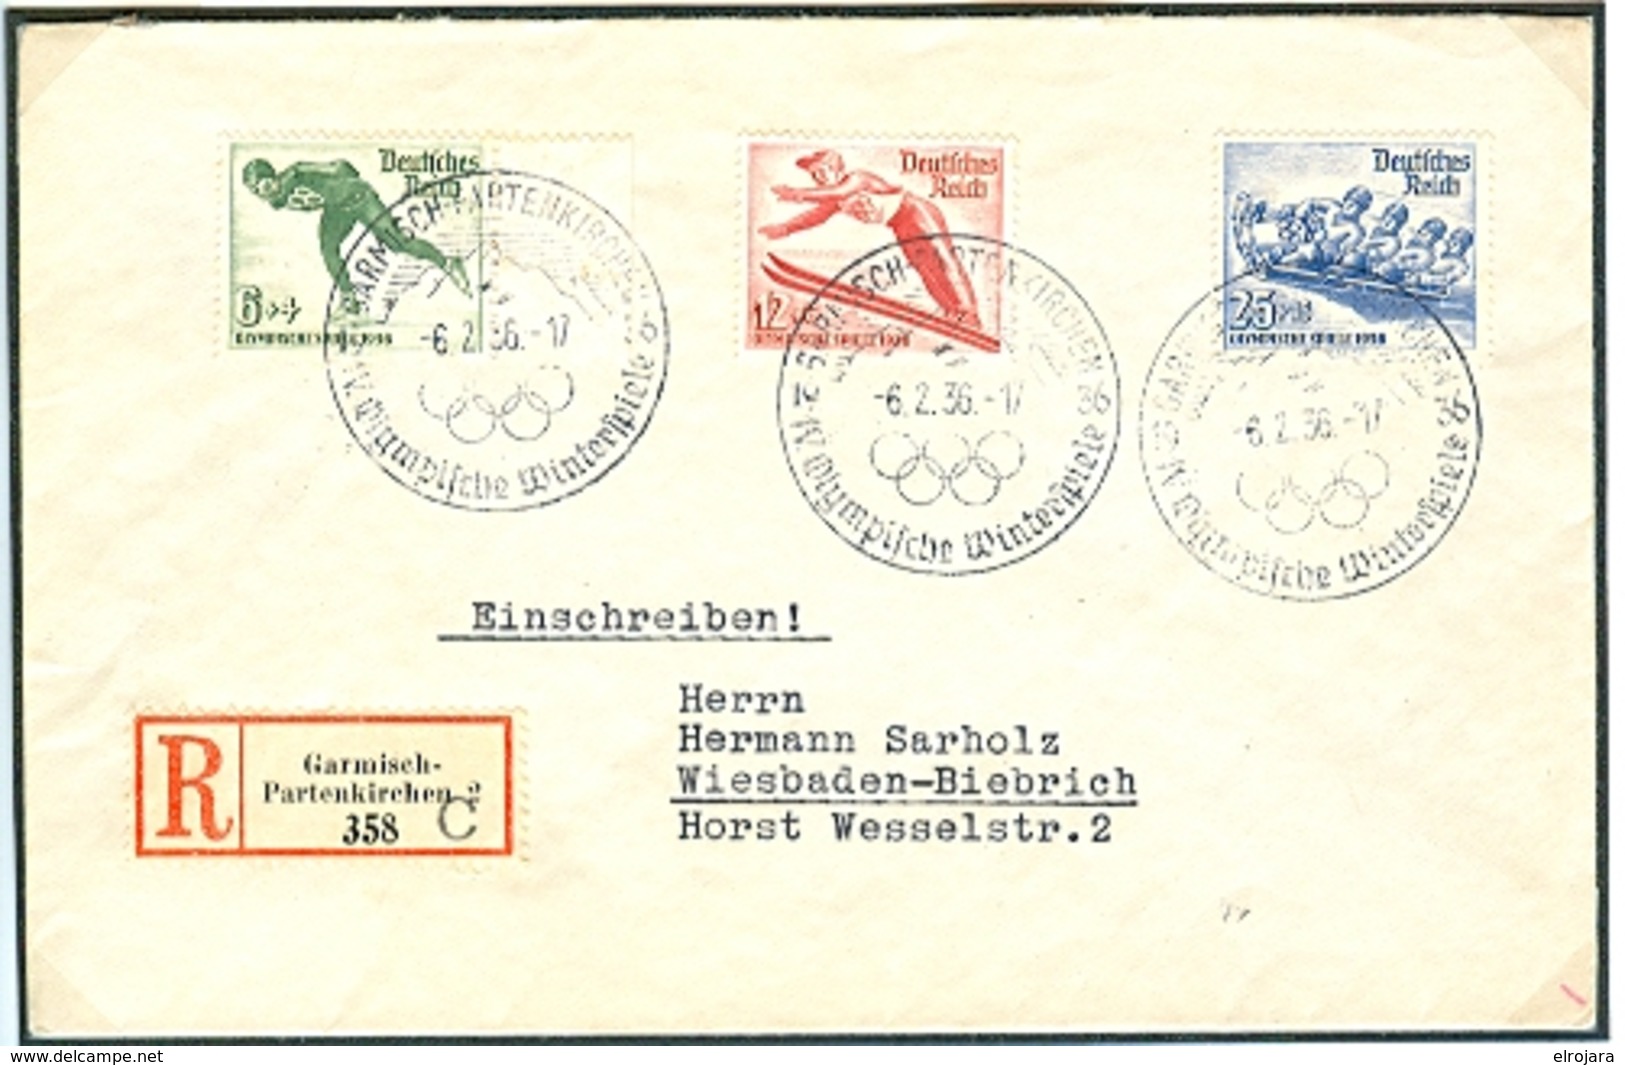 GERMANY Registered Letter With The Complete Set With R Label With C And Olympic Cancel Of The Opening Day 6.2.36 17 - Hiver 1936: Garmisch-Partenkirchen